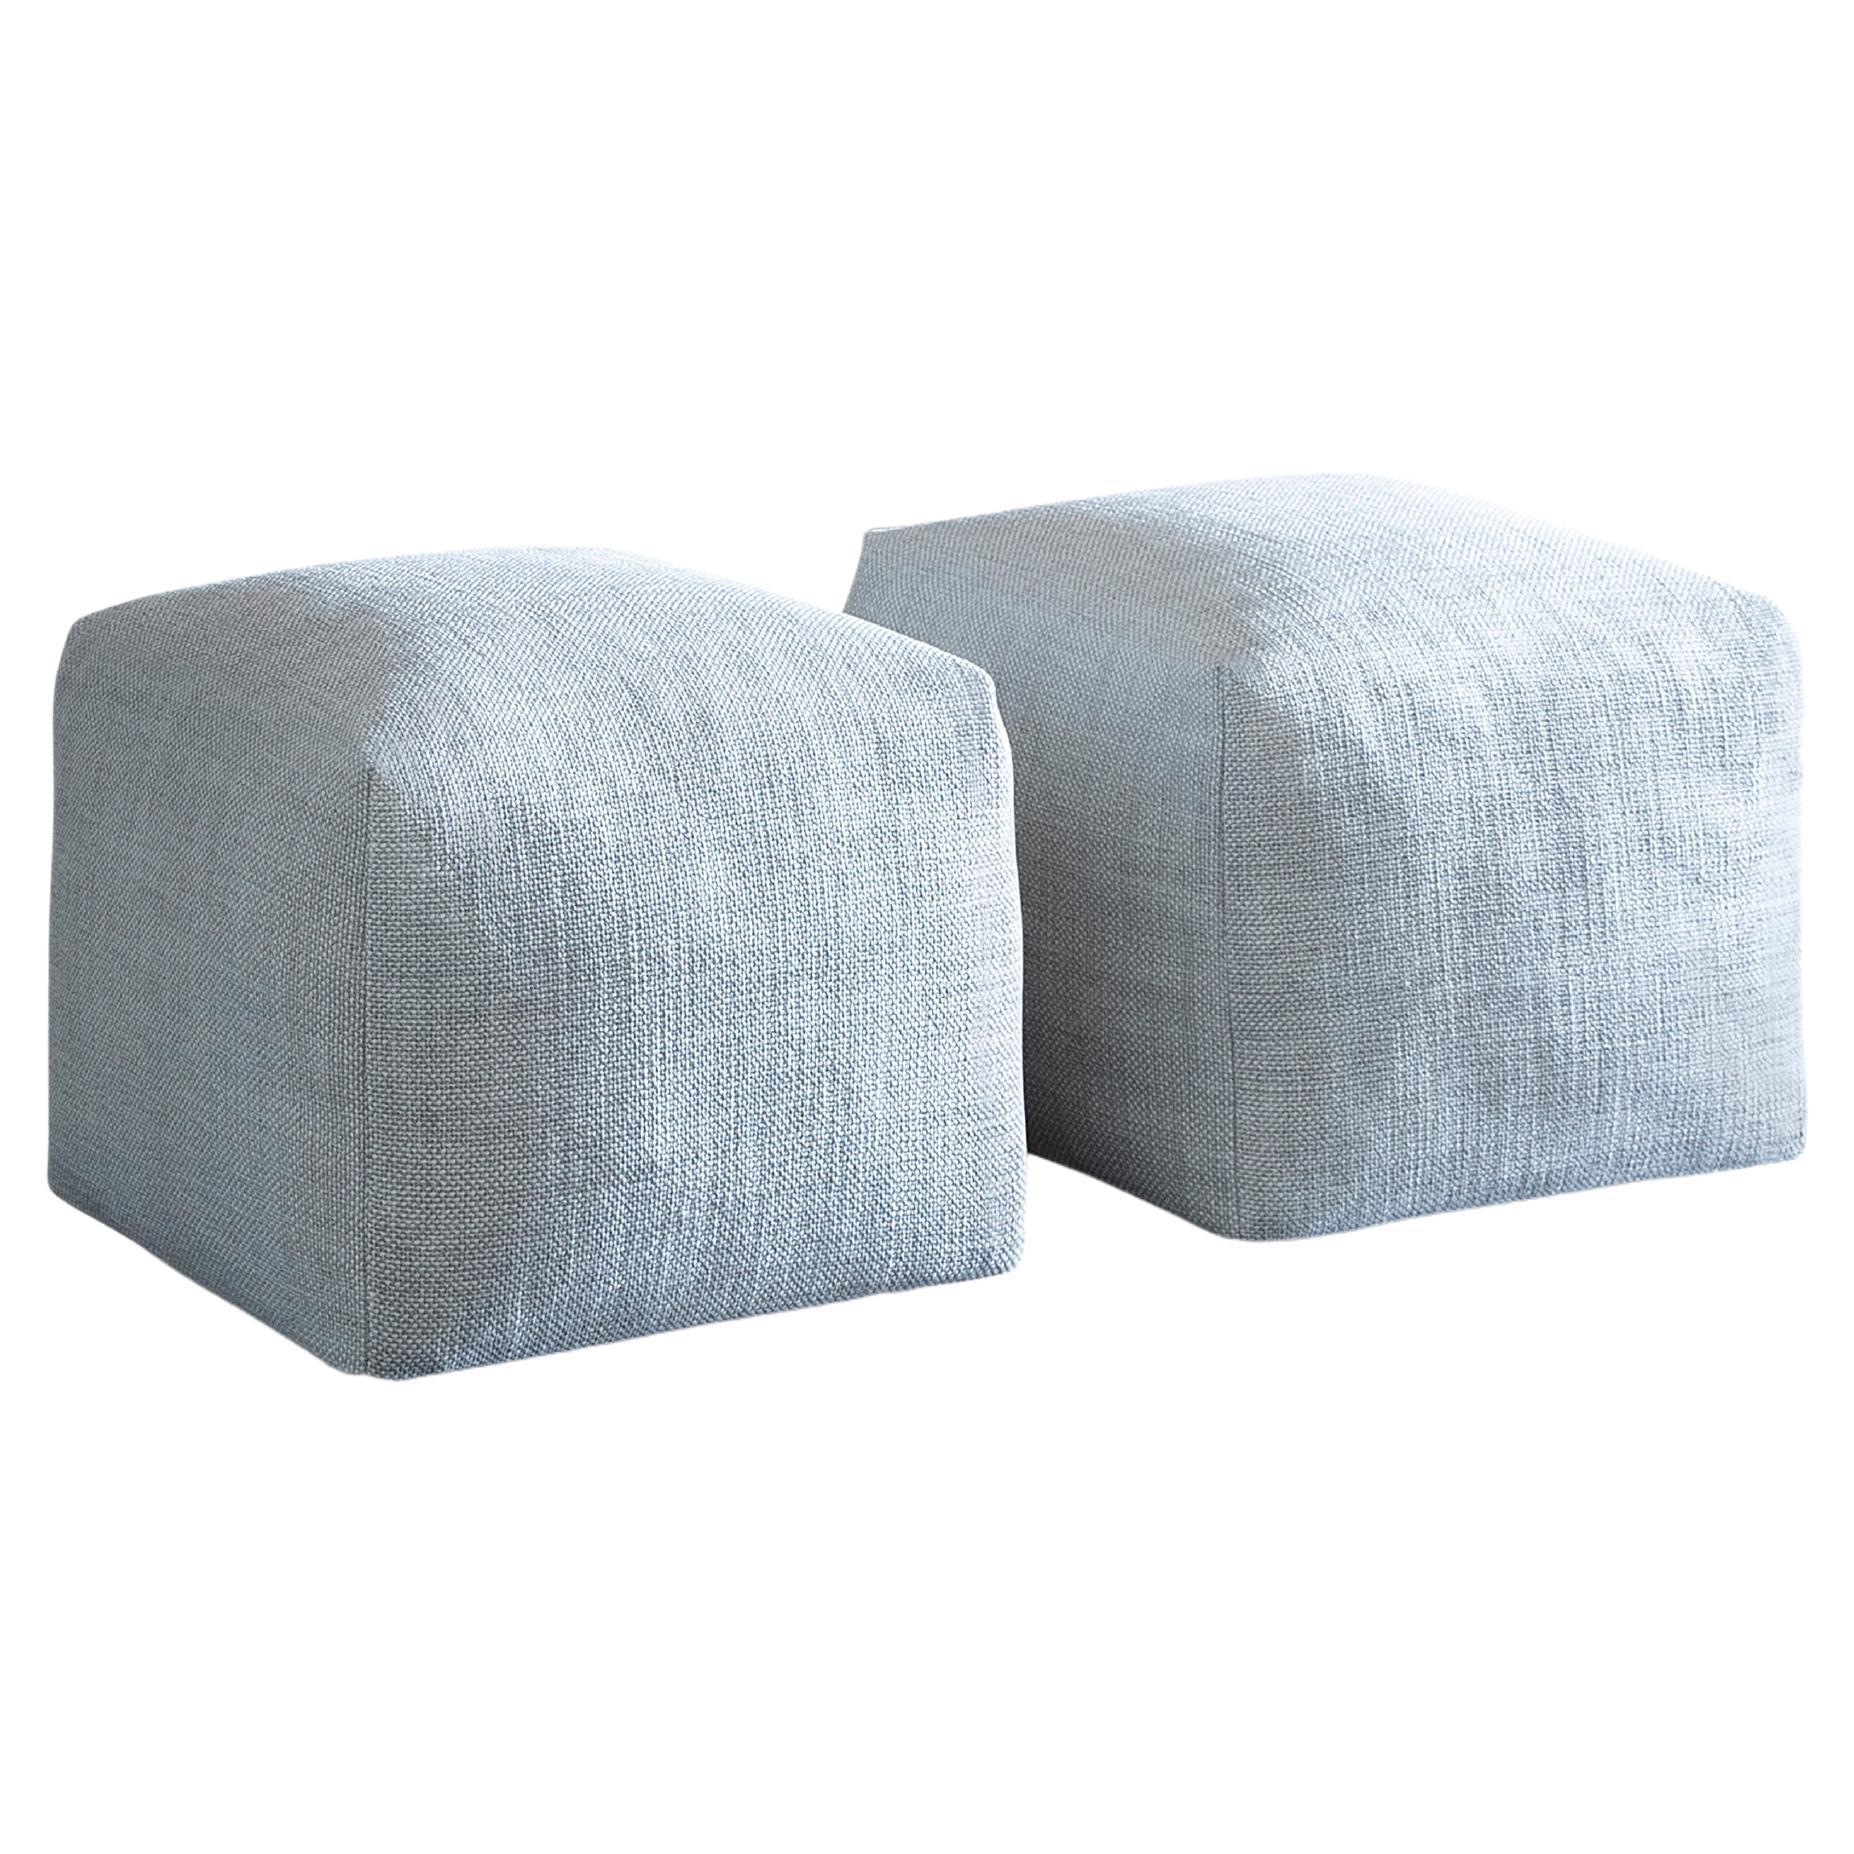 Pixel Pouf in Avant Après Grey Upholstery by Sergio Bicego For Sale